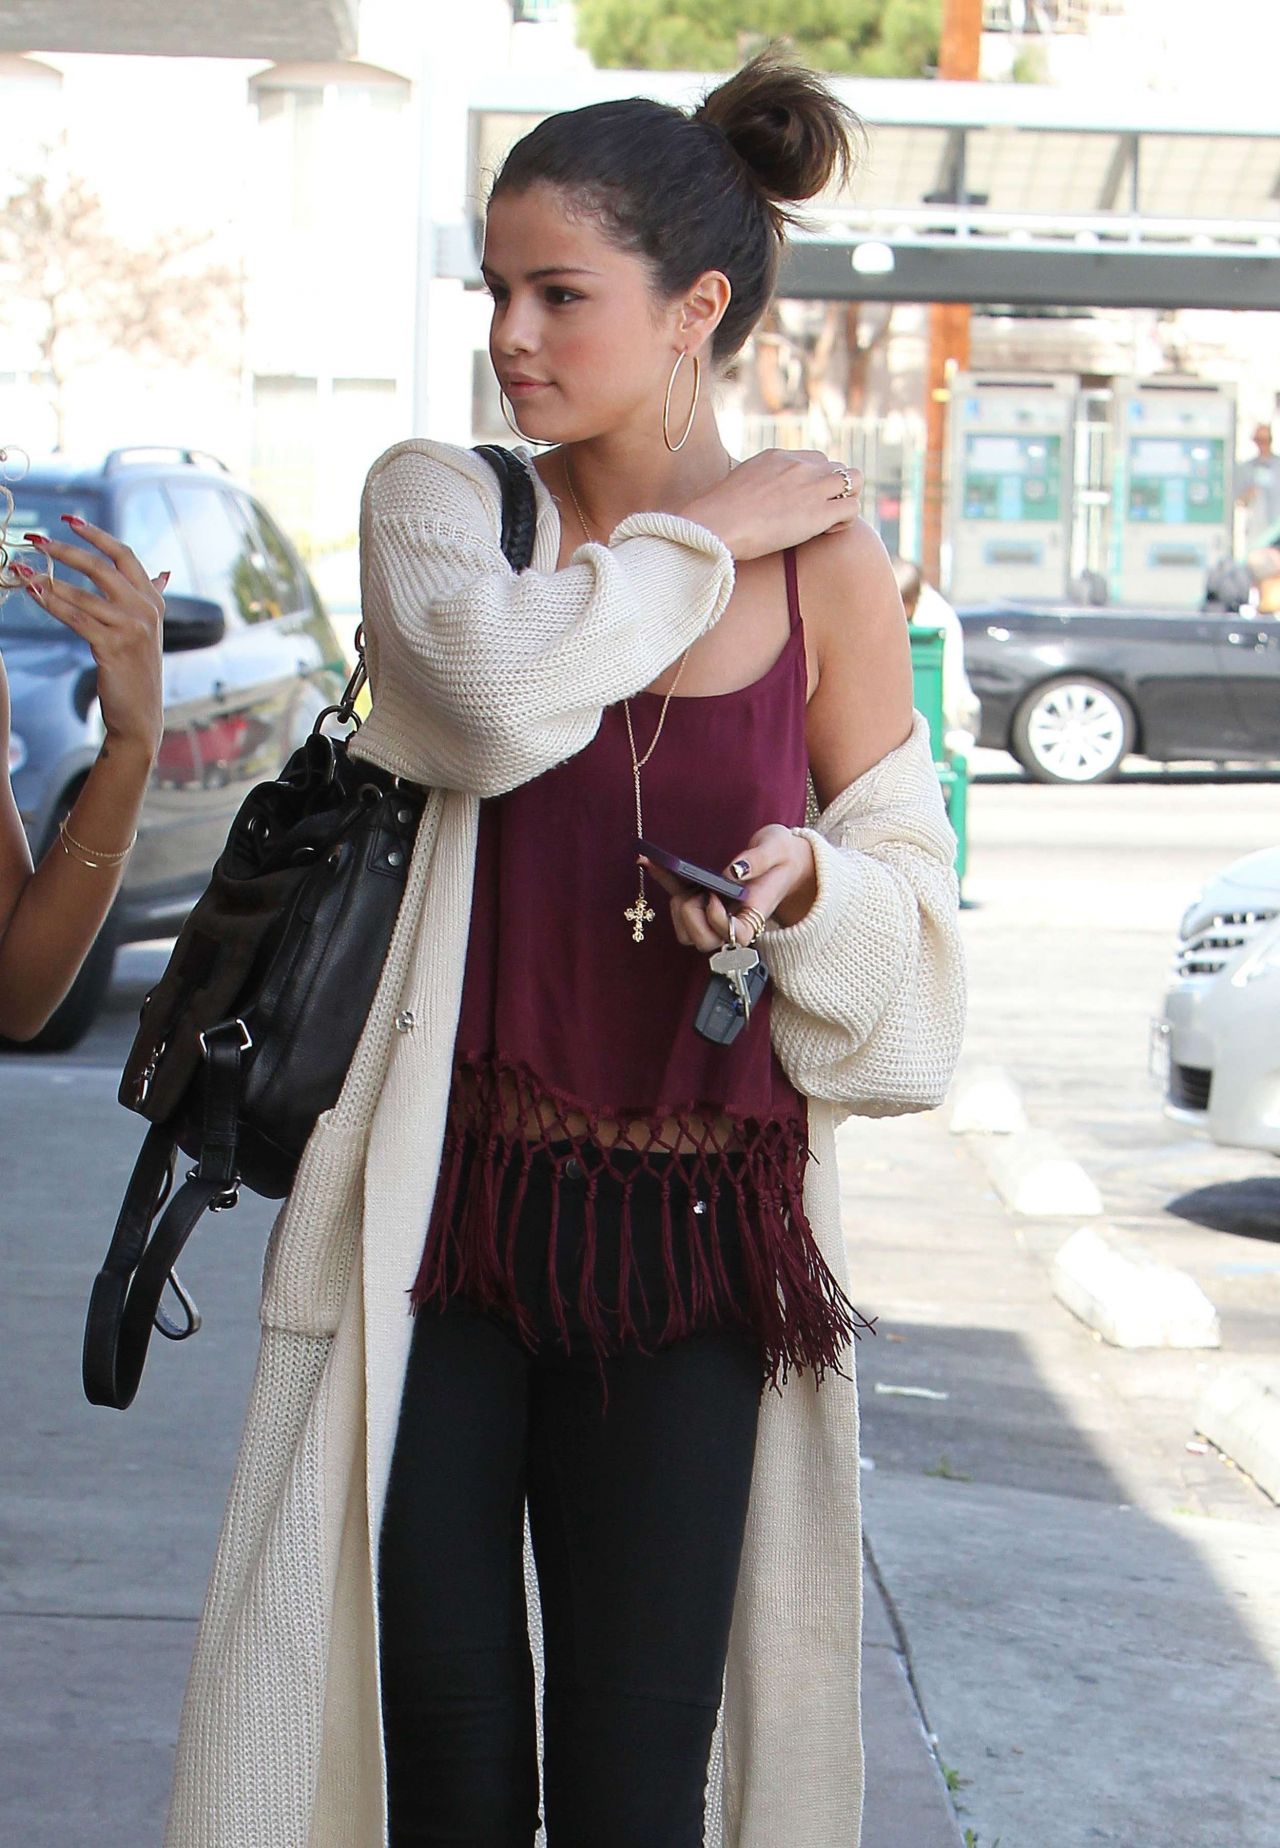 Selena Gomez in Tights - Out in Los Angeles - February 20141280 x 1848